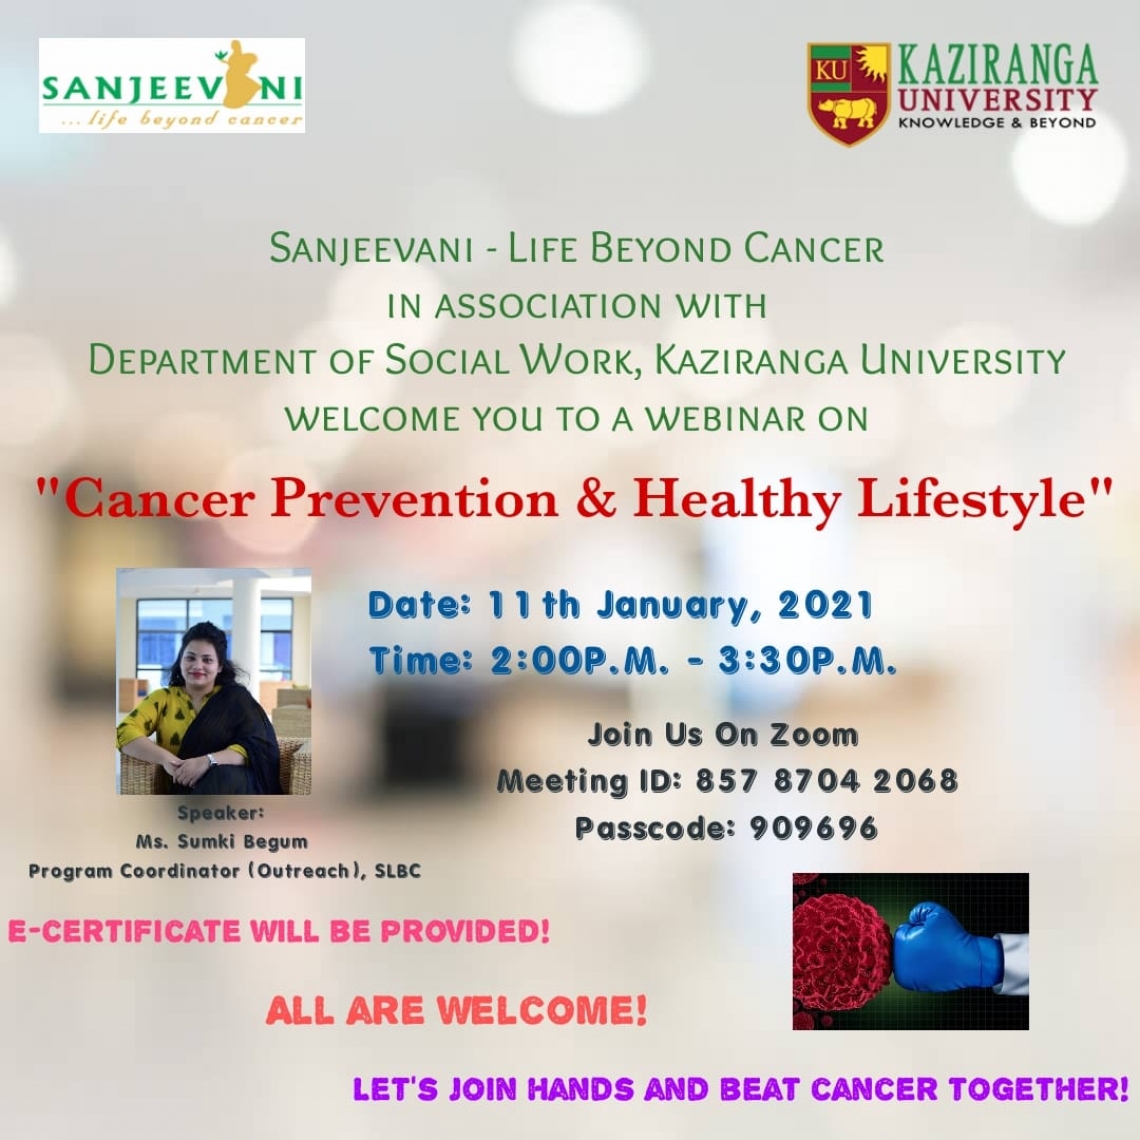 Sanjeevani - Life Beyond Cancer will conduct a webinar on "Cancer prevention &amp; Healthy Lifestyle on 11th January 2021 in association with the department of Social Work, Kaziranga University.